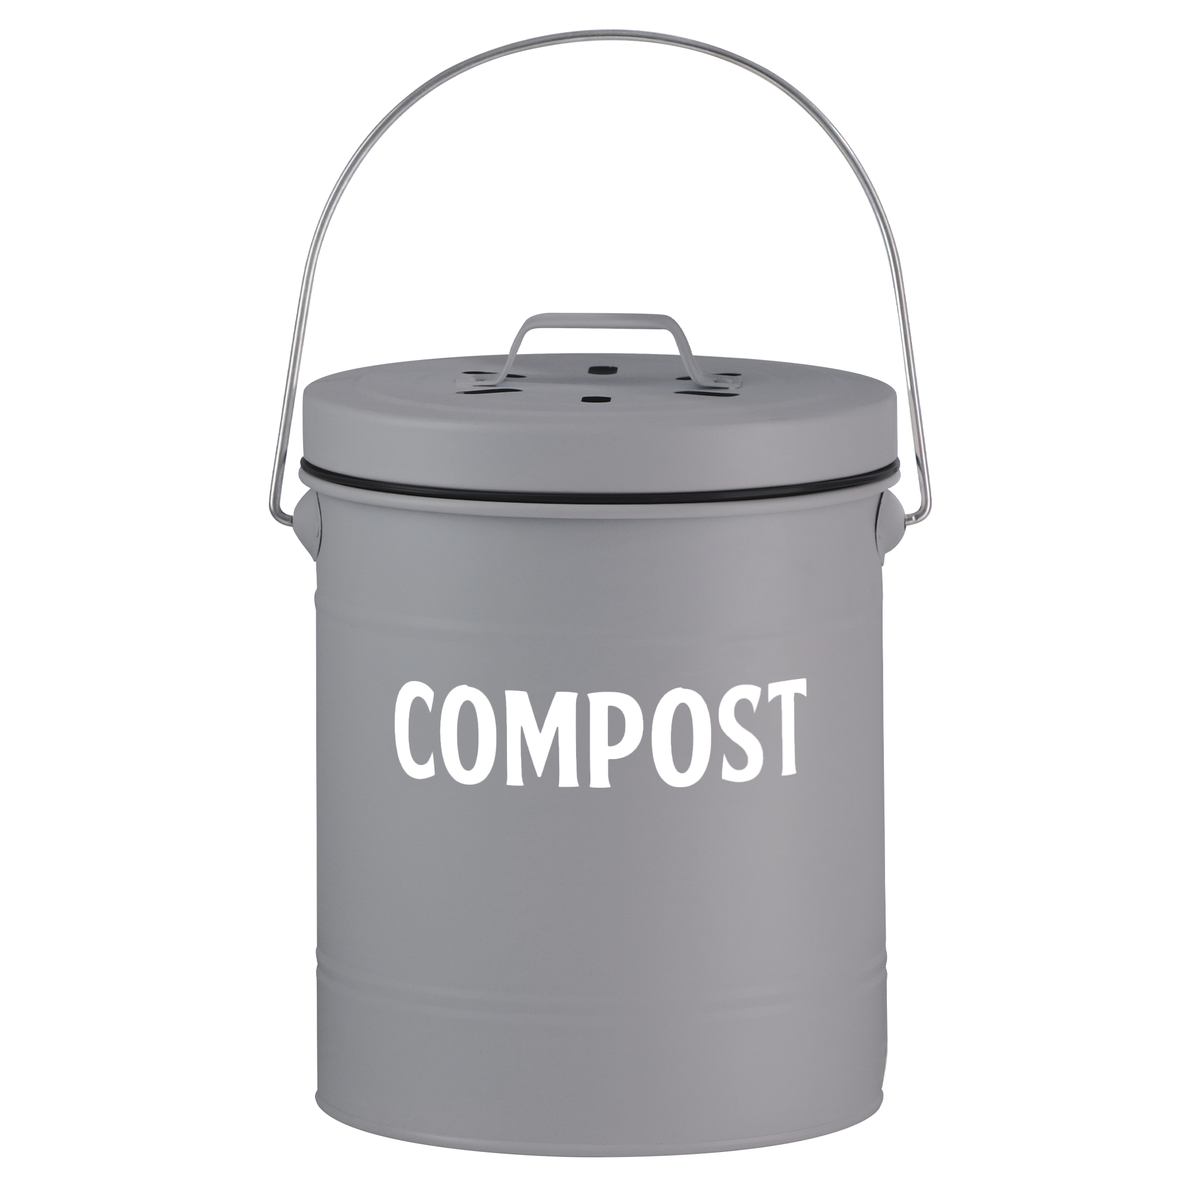 Granrosi Kitchen Compost Bin Countertop, Indoor Compost Bin with Lid, 100%  Rust Proof Compost Bucket w/Non-Smell Charcoal Filters, 1.3 Gallon - White